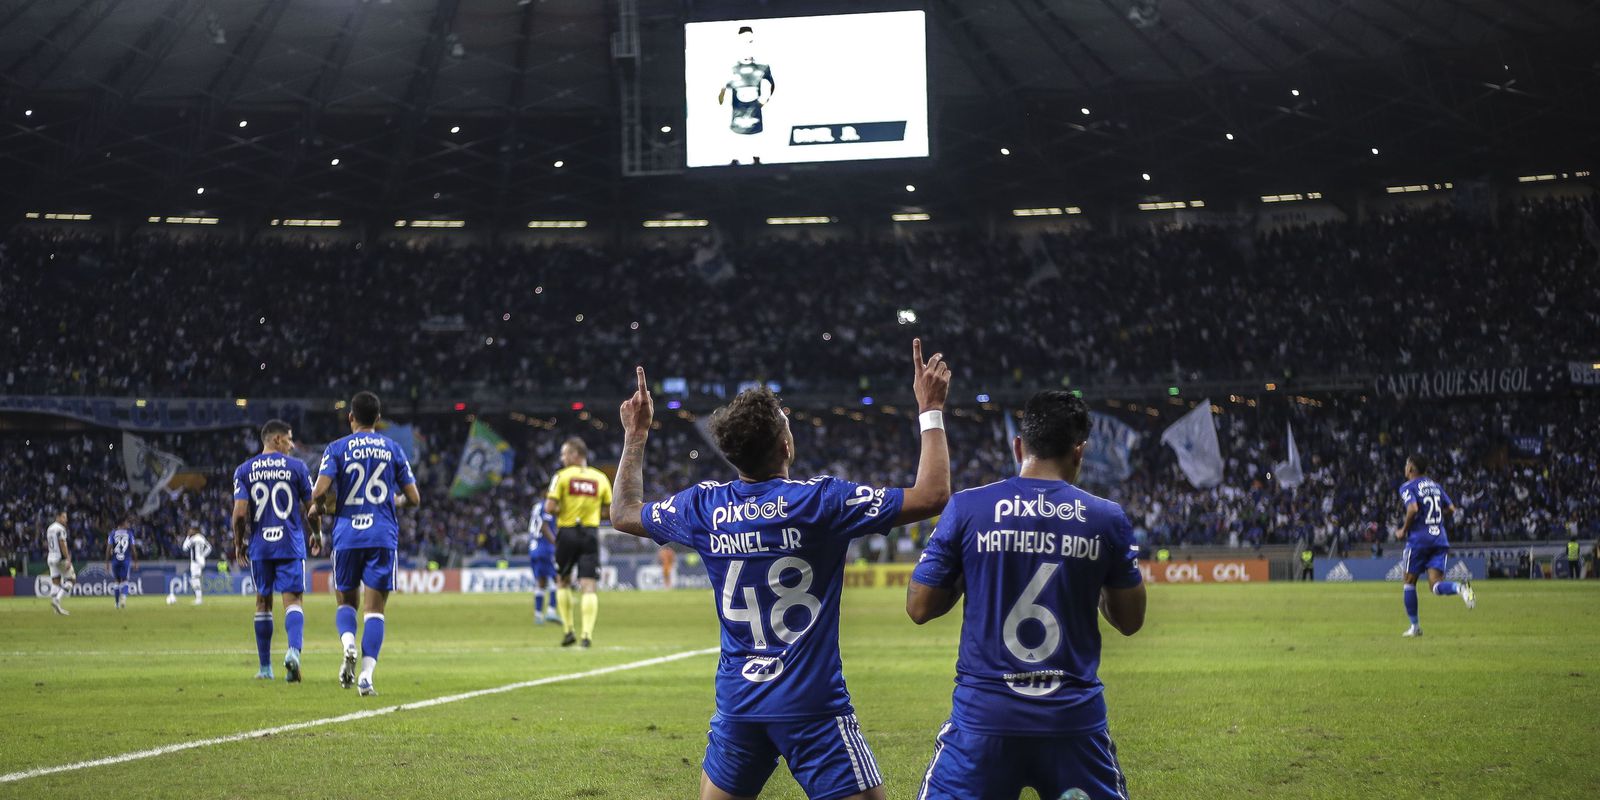 Cruzeiro wins at Mineirão and extends lead in Serie B